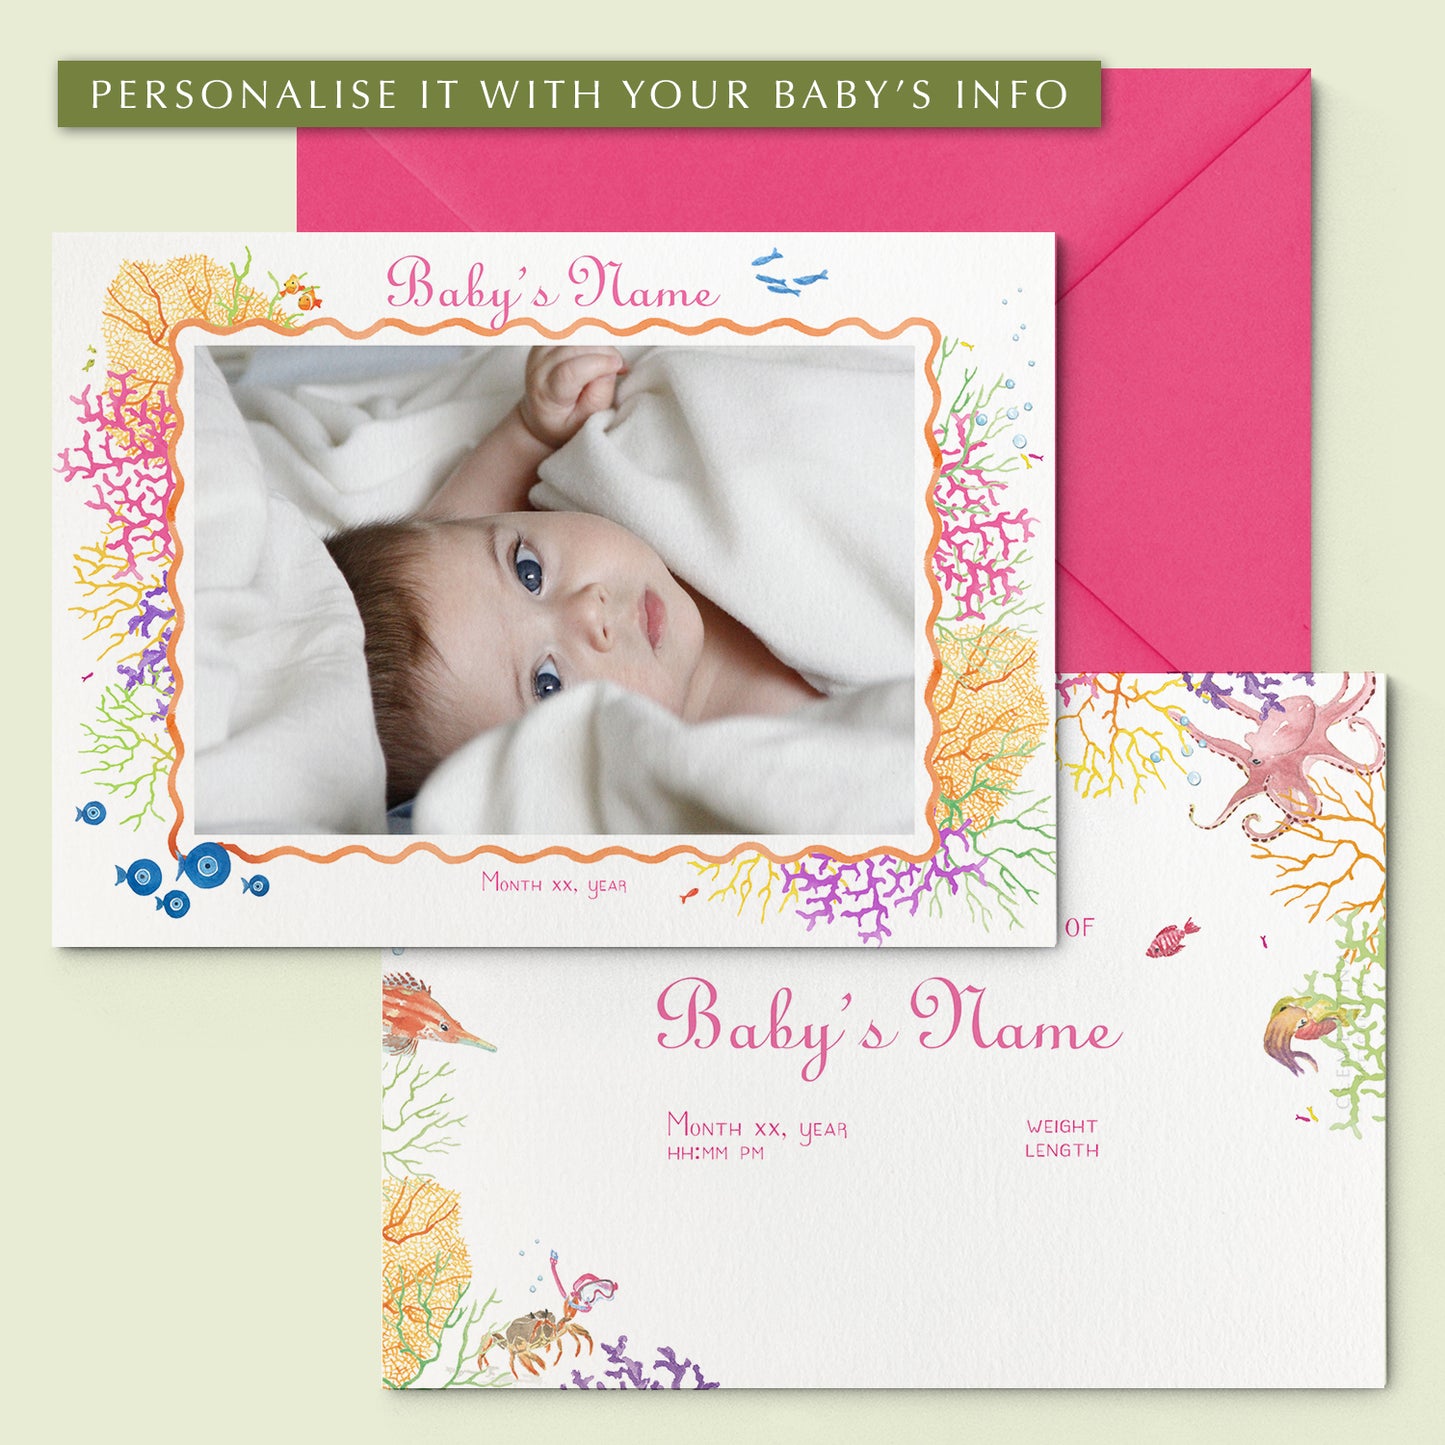 Coral Reef Printed Birth Announcements - With Photo - 01